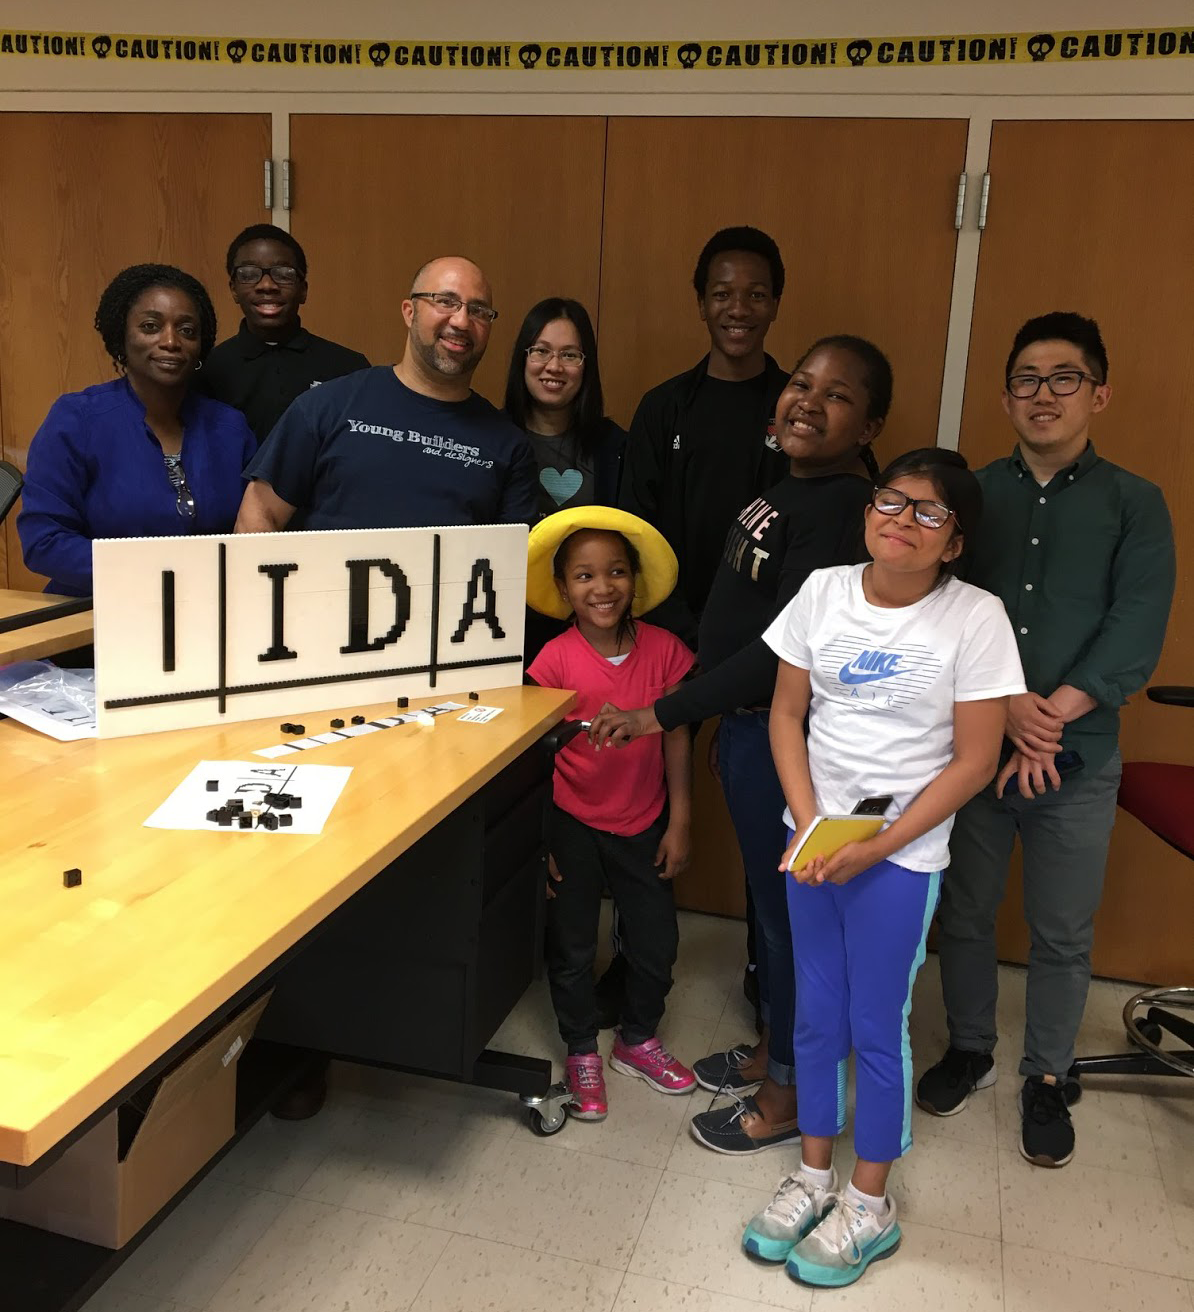 Students and instructors posing with completed IIDA logo.